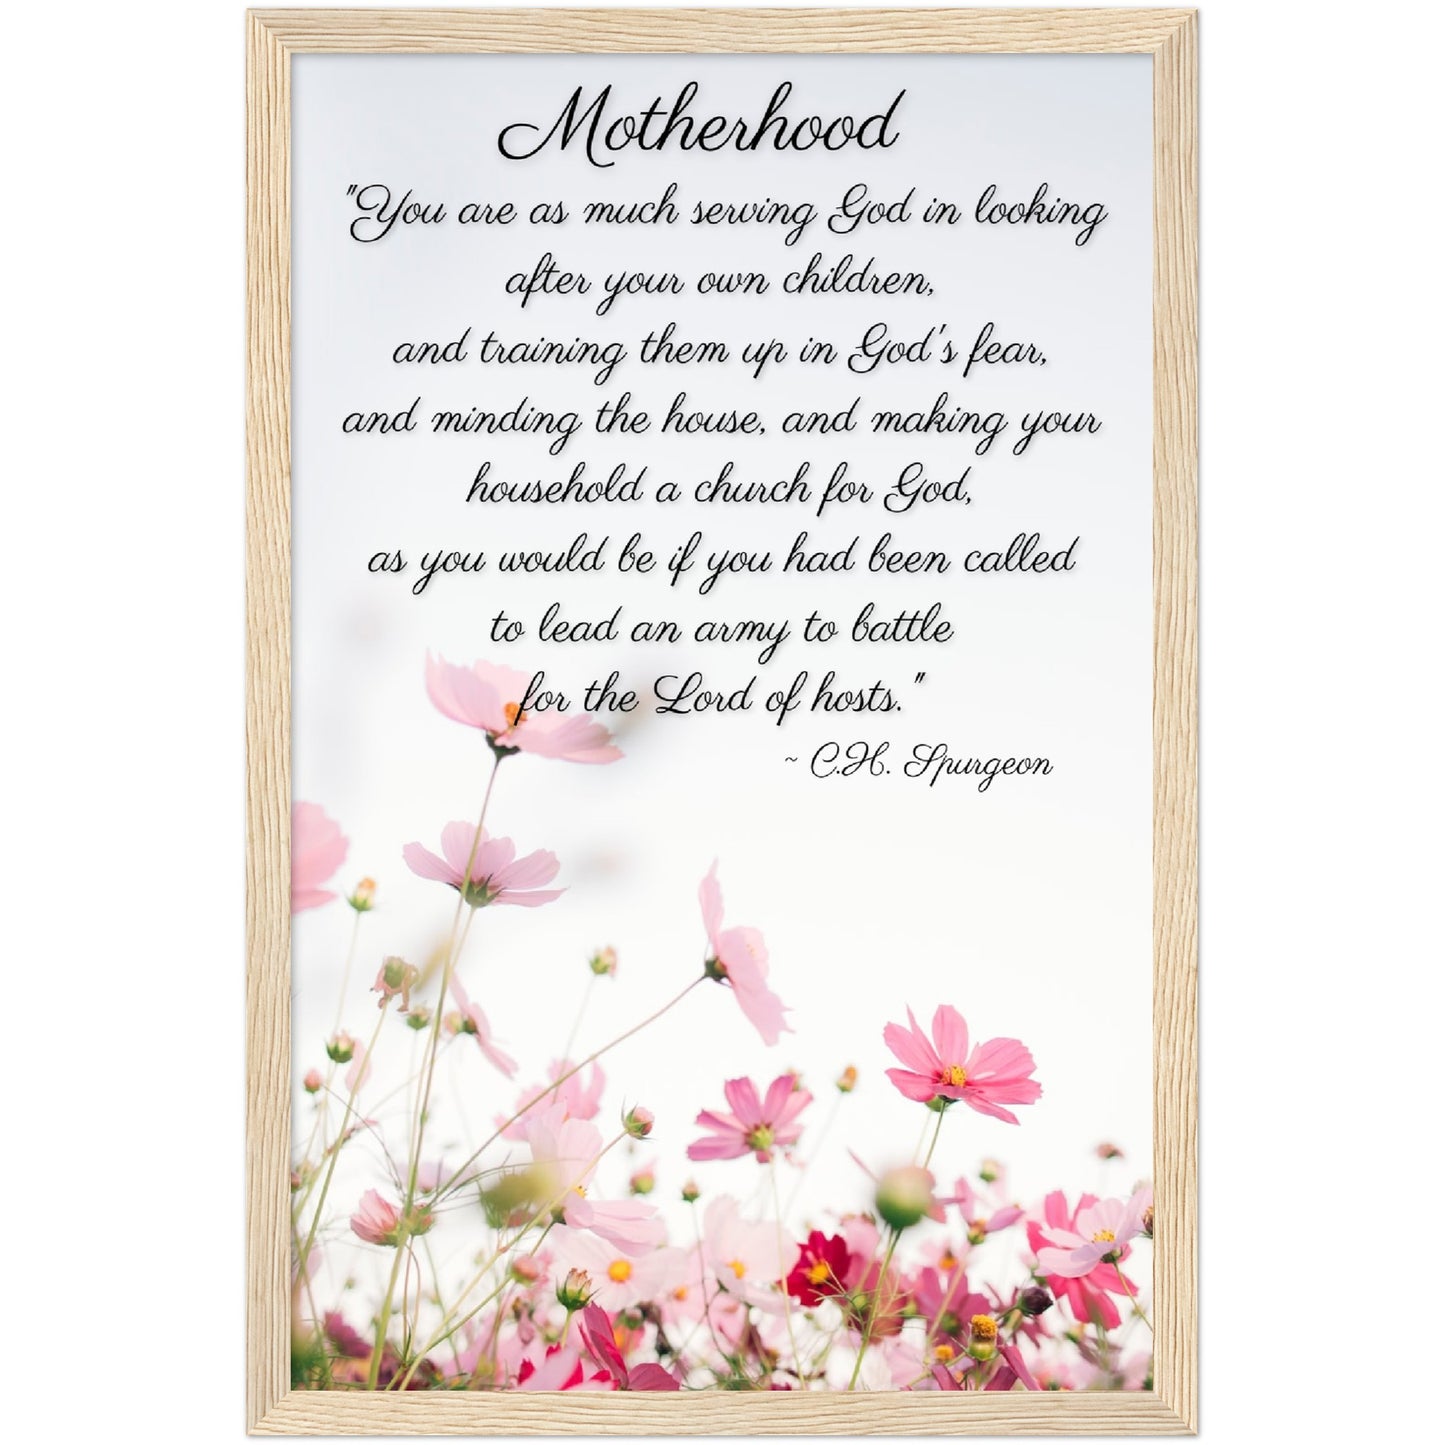 Framed Motherhood Quote Floral | Quote by C.H. Spurgeon Poster | Christian Wall Art for Mom